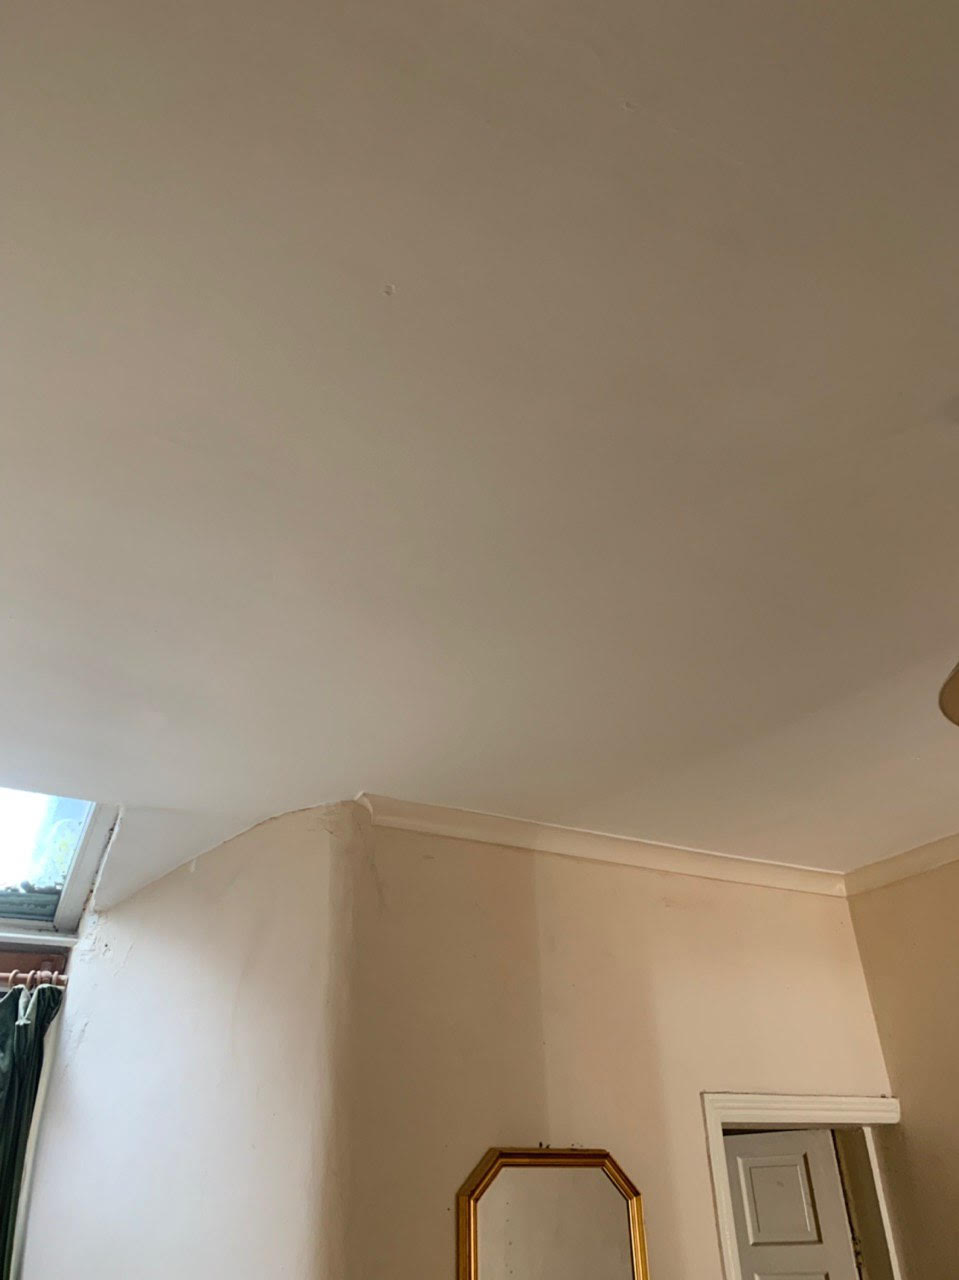 Water damaged ceiling due to a leak